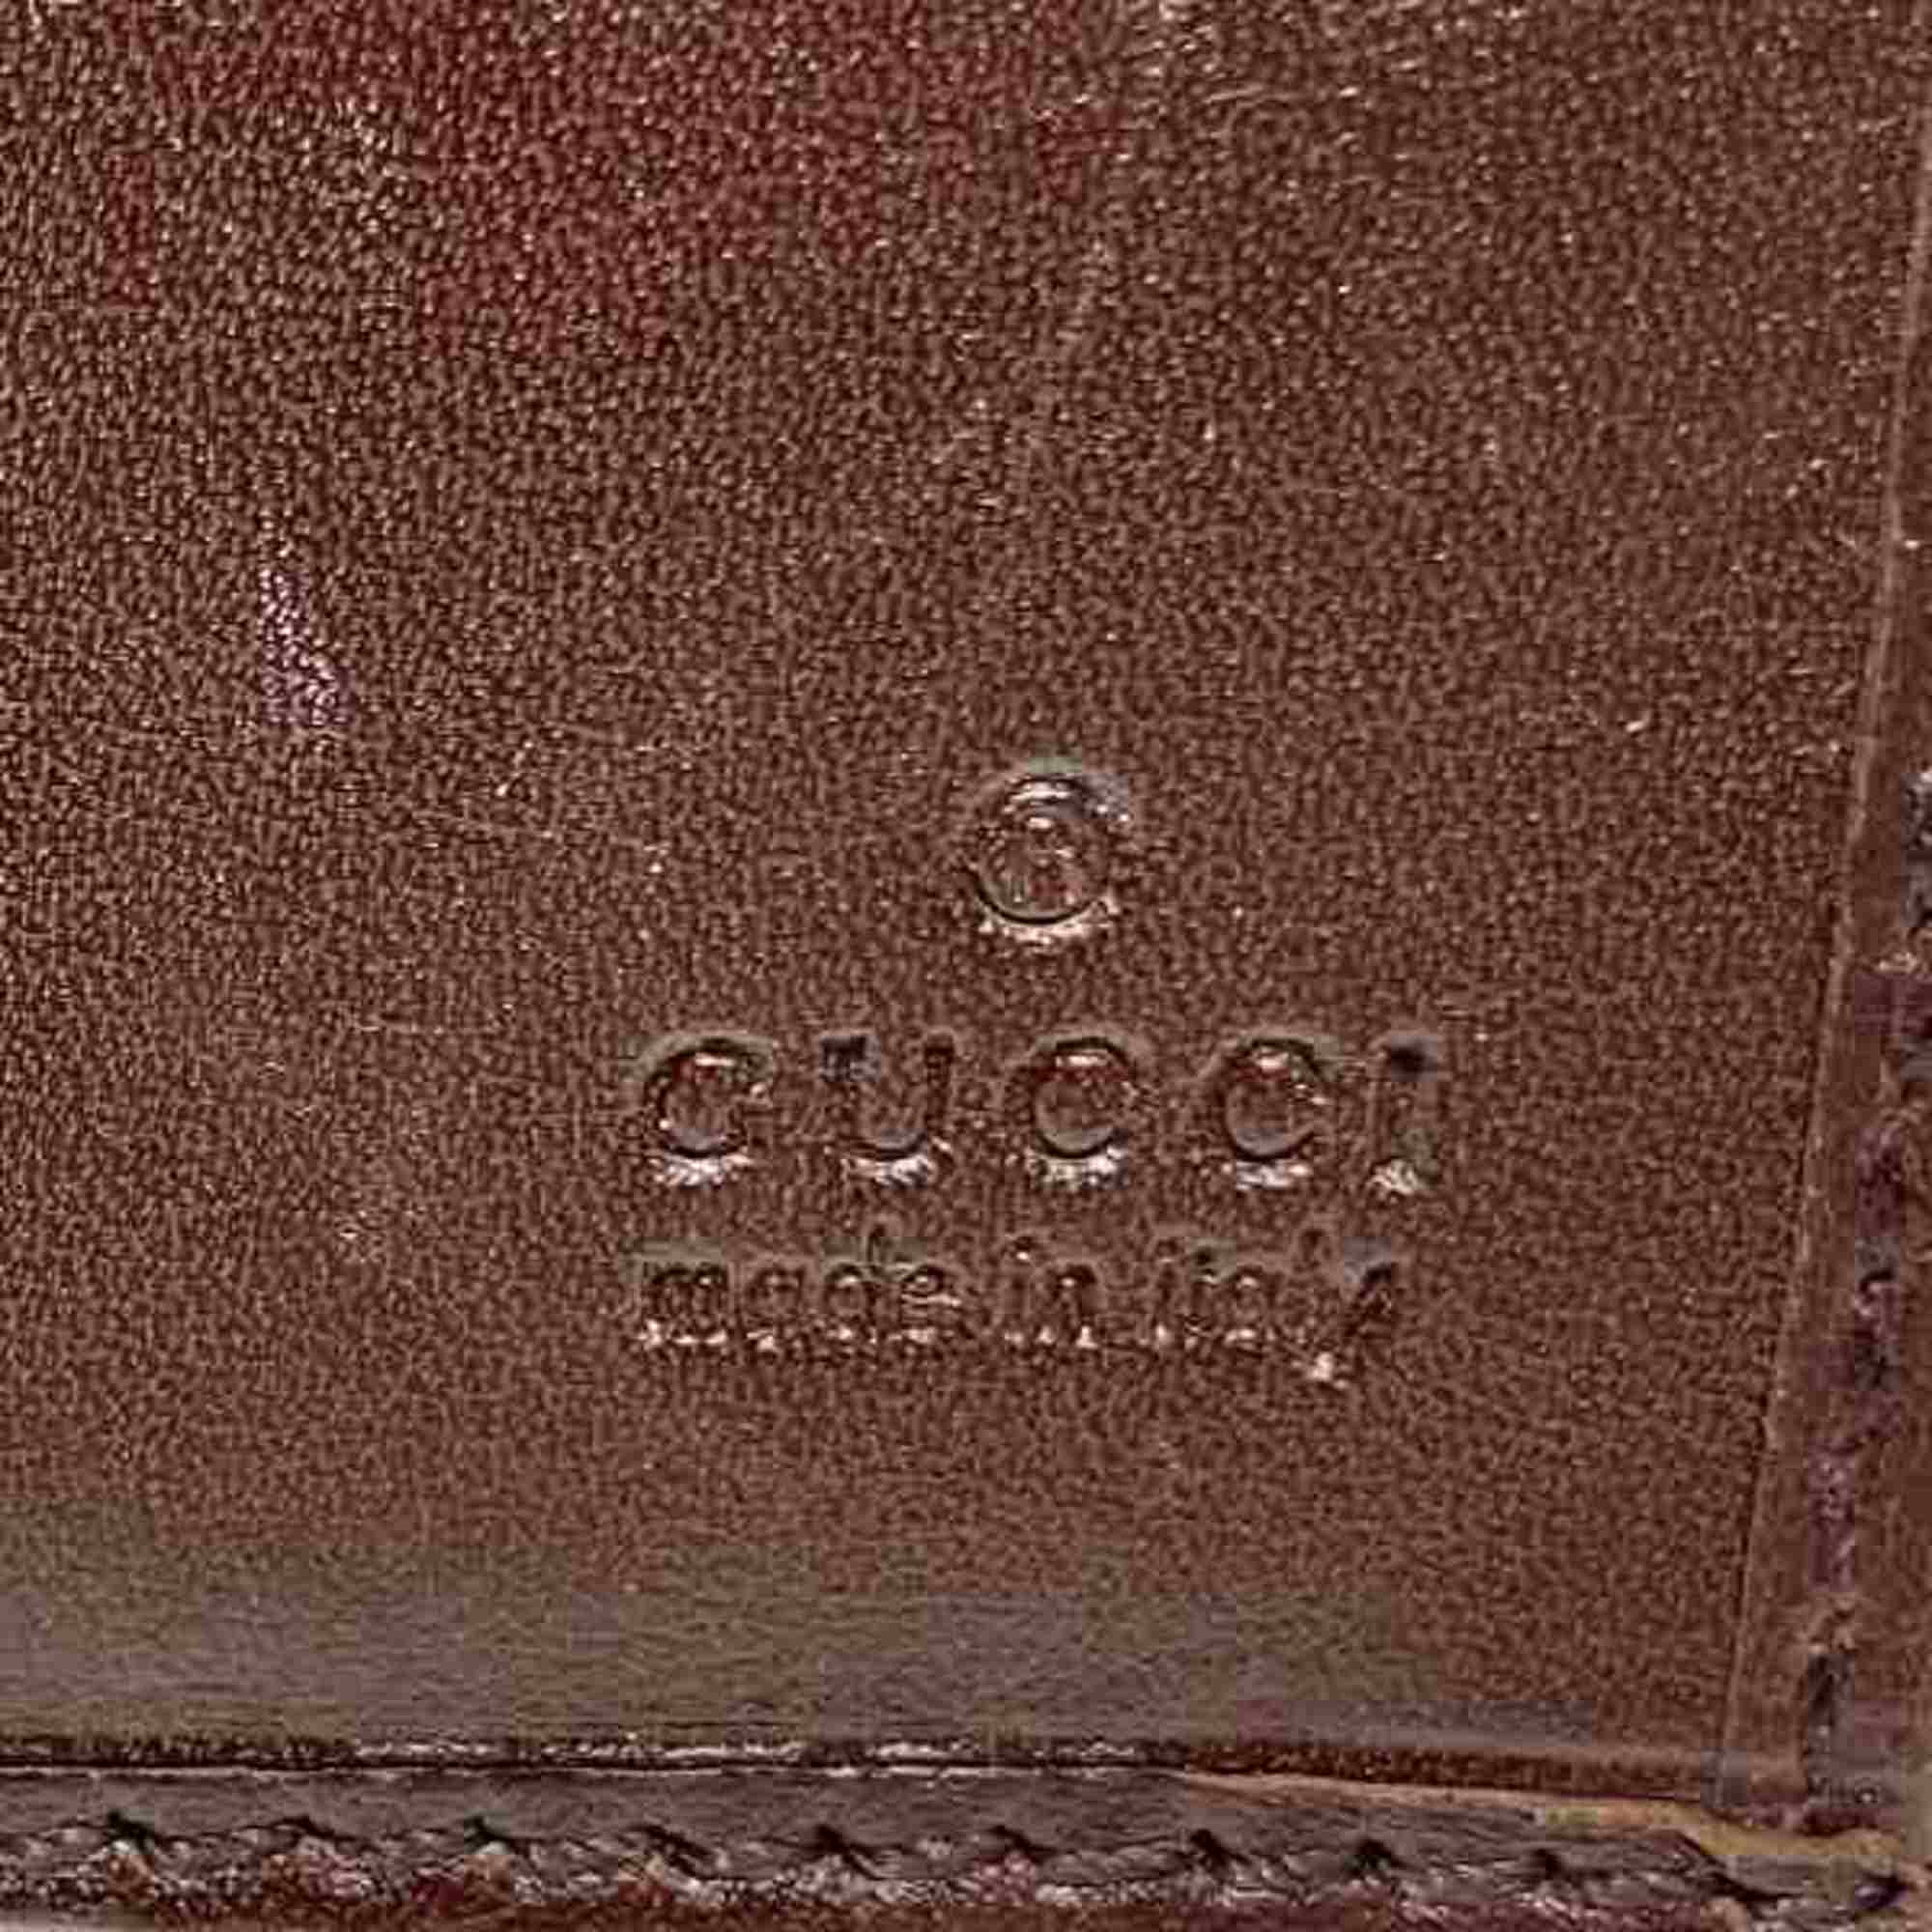 Gucci GUCCI Guccisima W hook leather 112715.0416 long wallet ladies